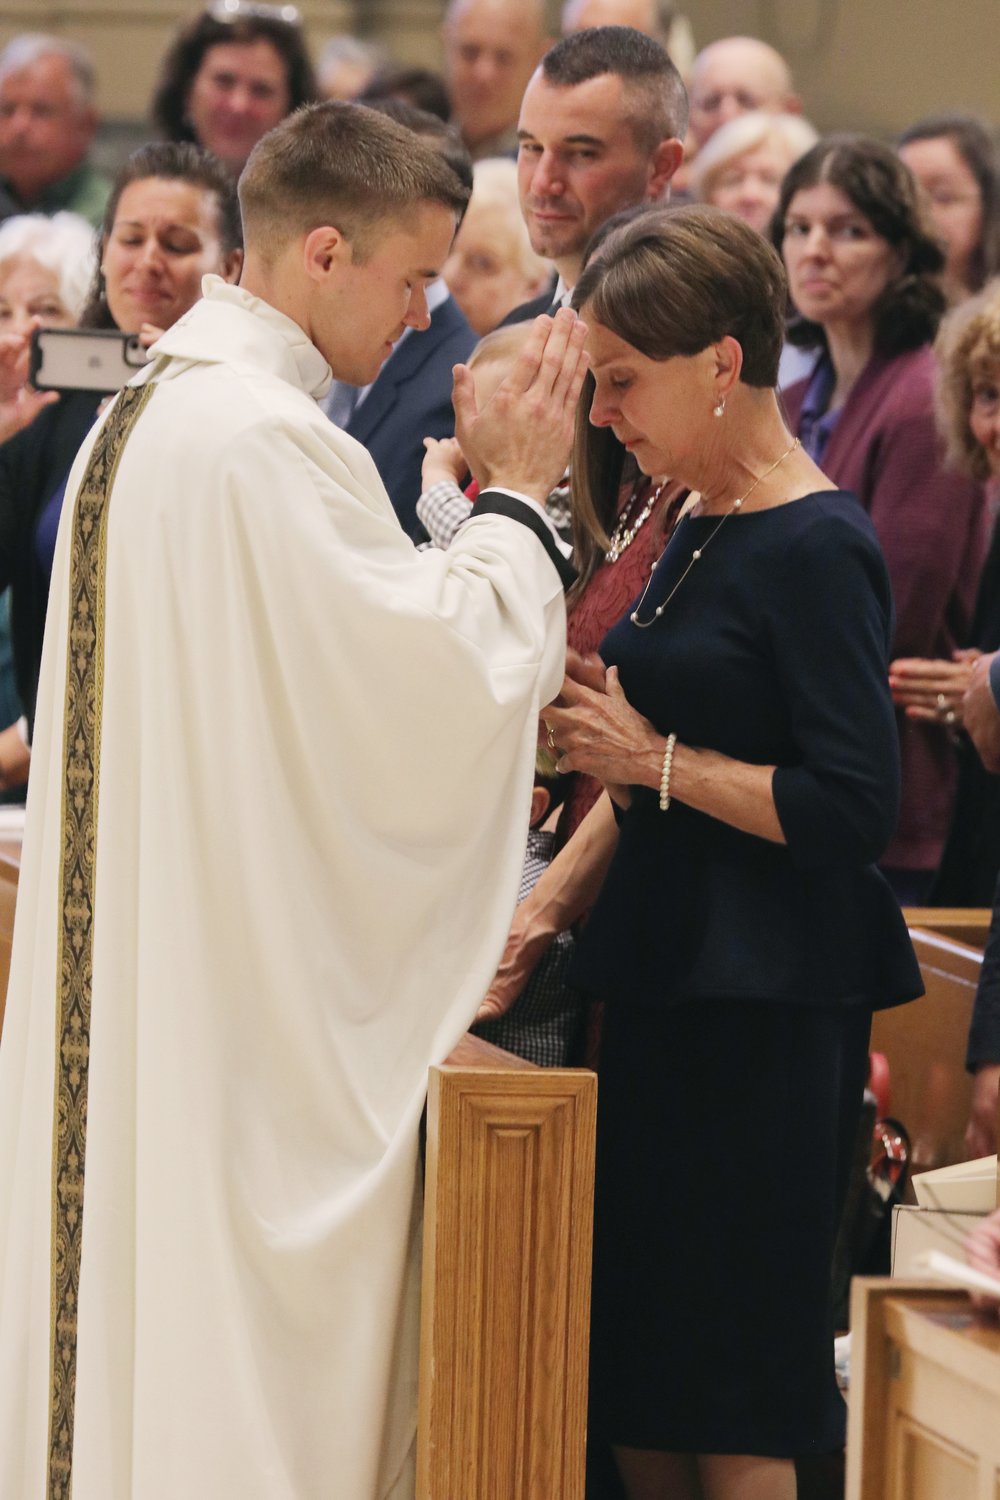 Father Mark Gadoury offers a blessing upon his mother, Cheryll.